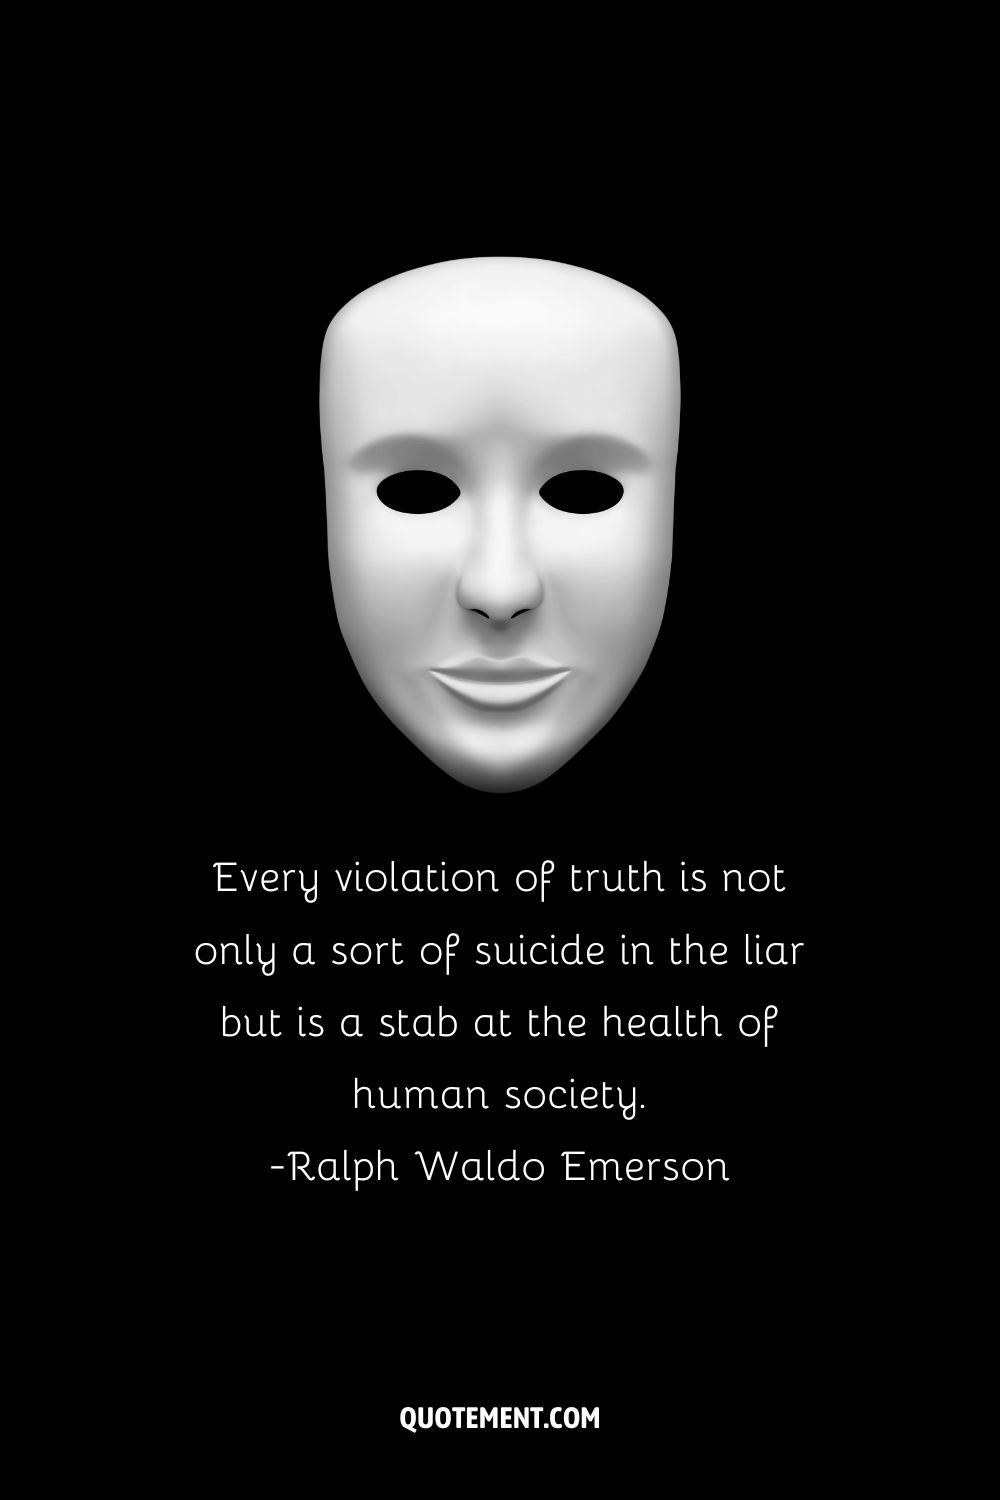 white mask image representing wise liars quote